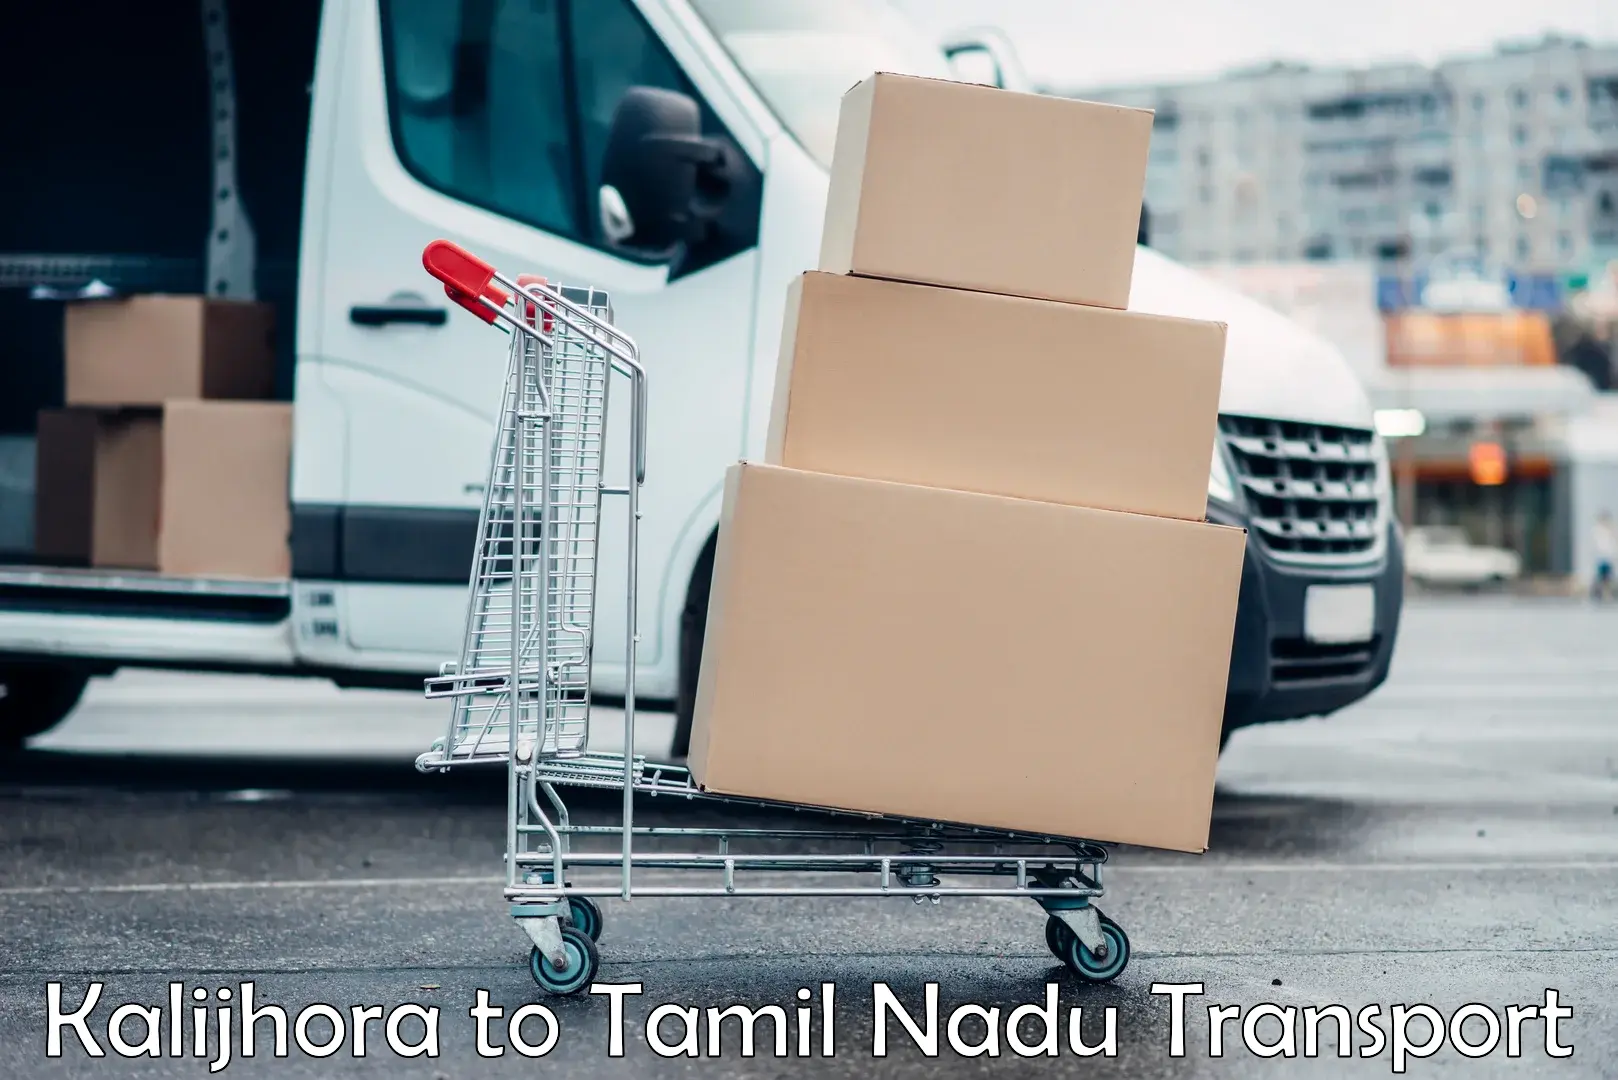 Shipping services Kalijhora to Shanmugha Arts Science Technology and Research Academy Thanjavur